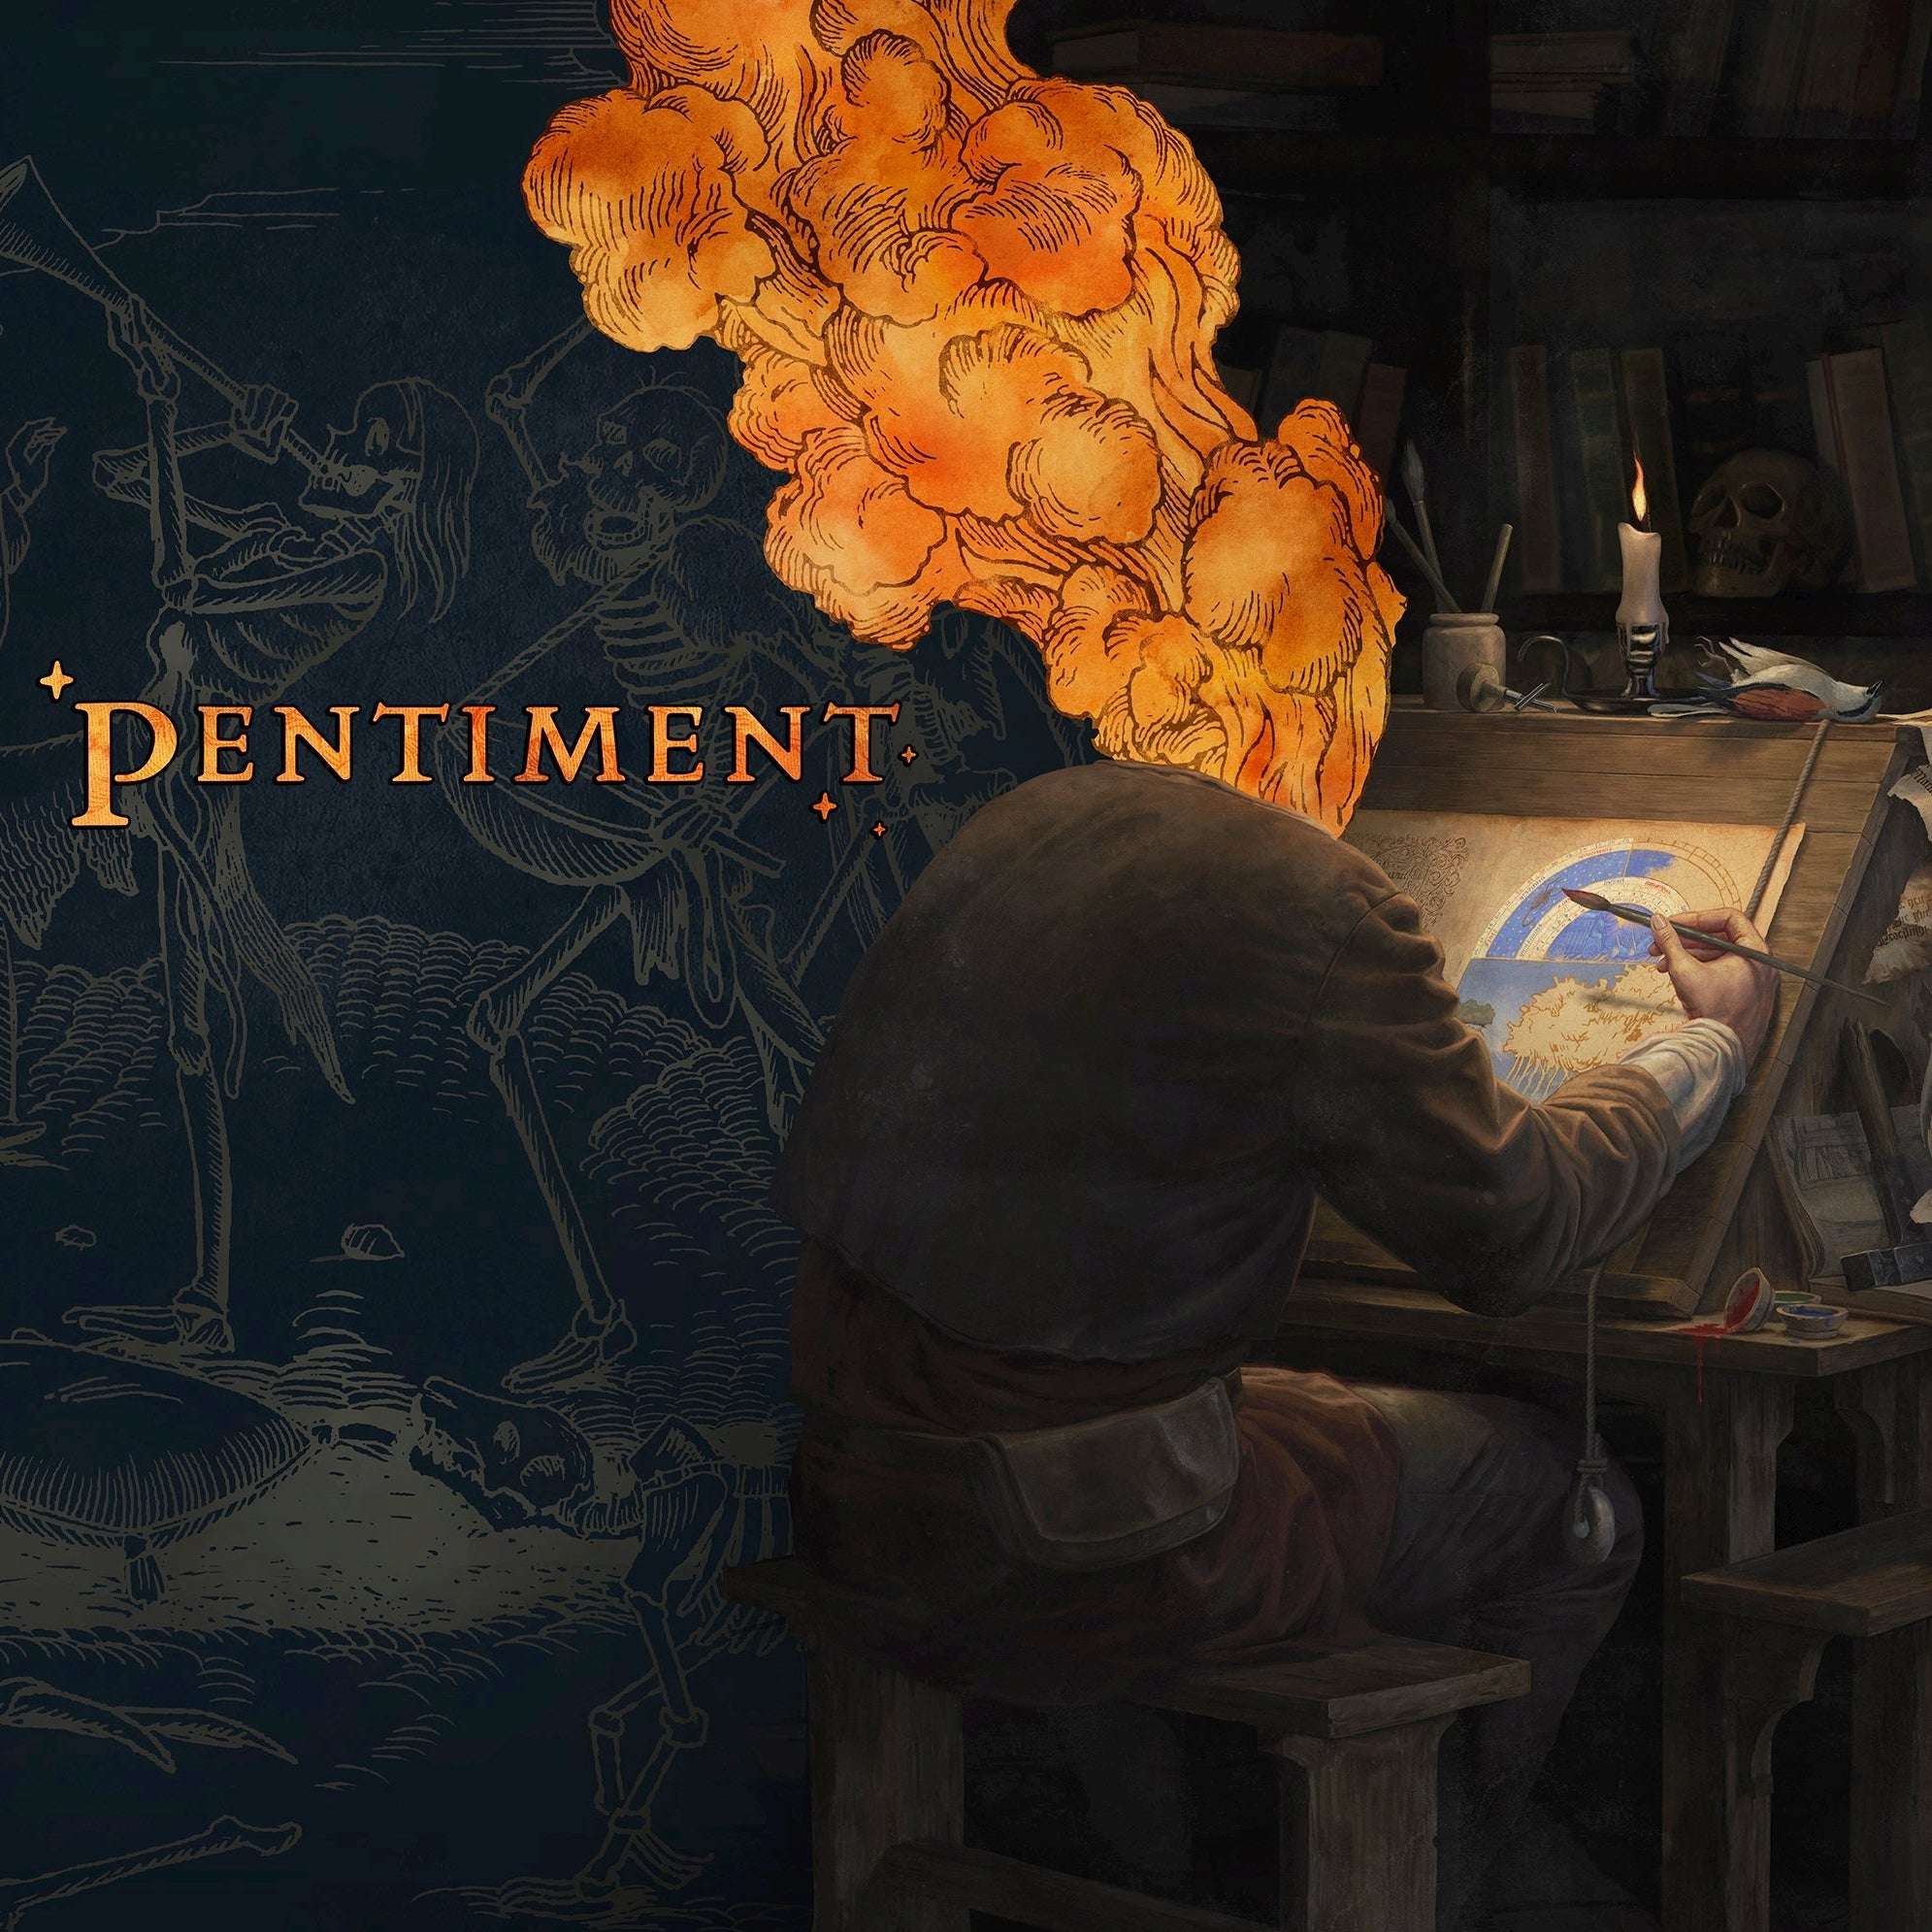 A rectangular promotional image for Pentiment. There is an unidentified character leaning over a table painting, their head is shrouded in orange smoke.